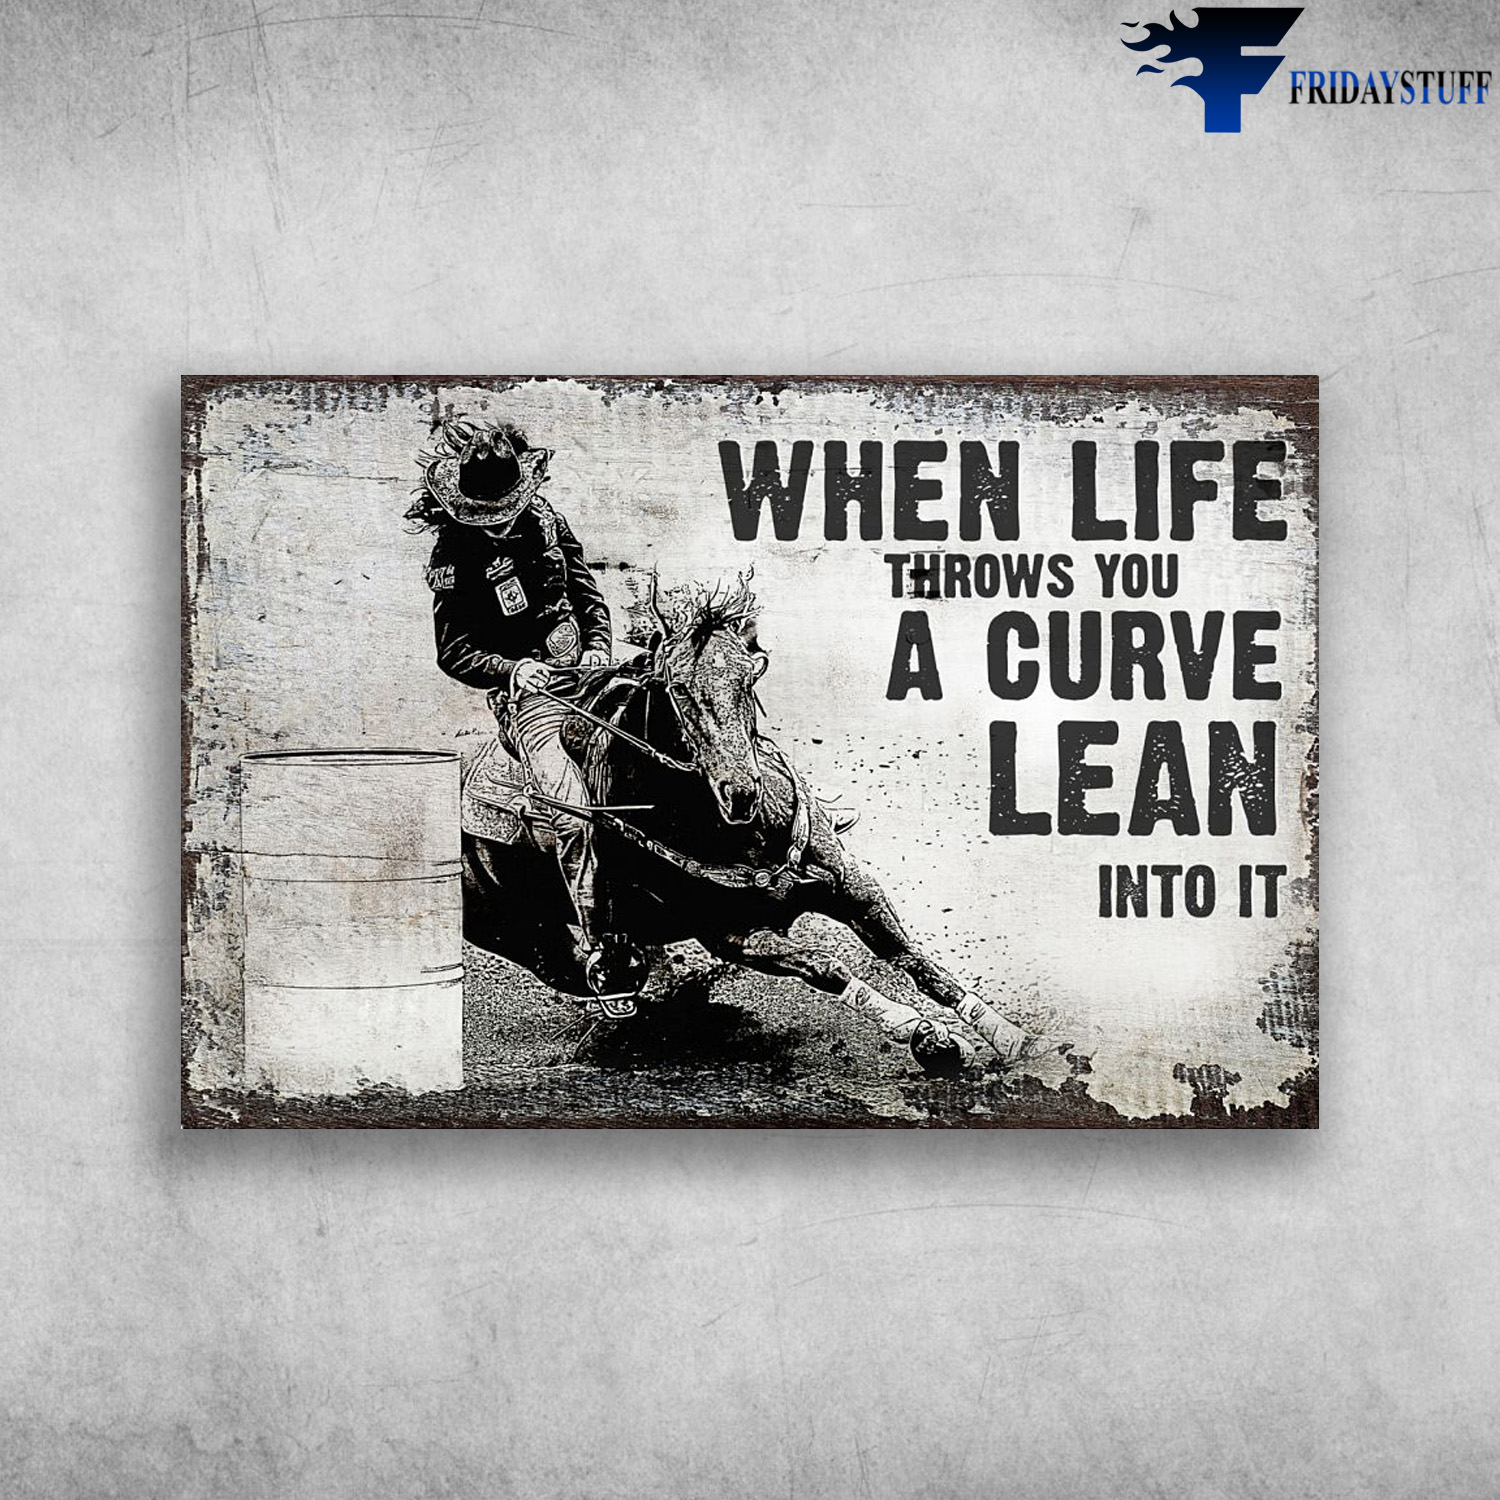 Barrel Racing - When Life Throws You A Curve, Lean Into It